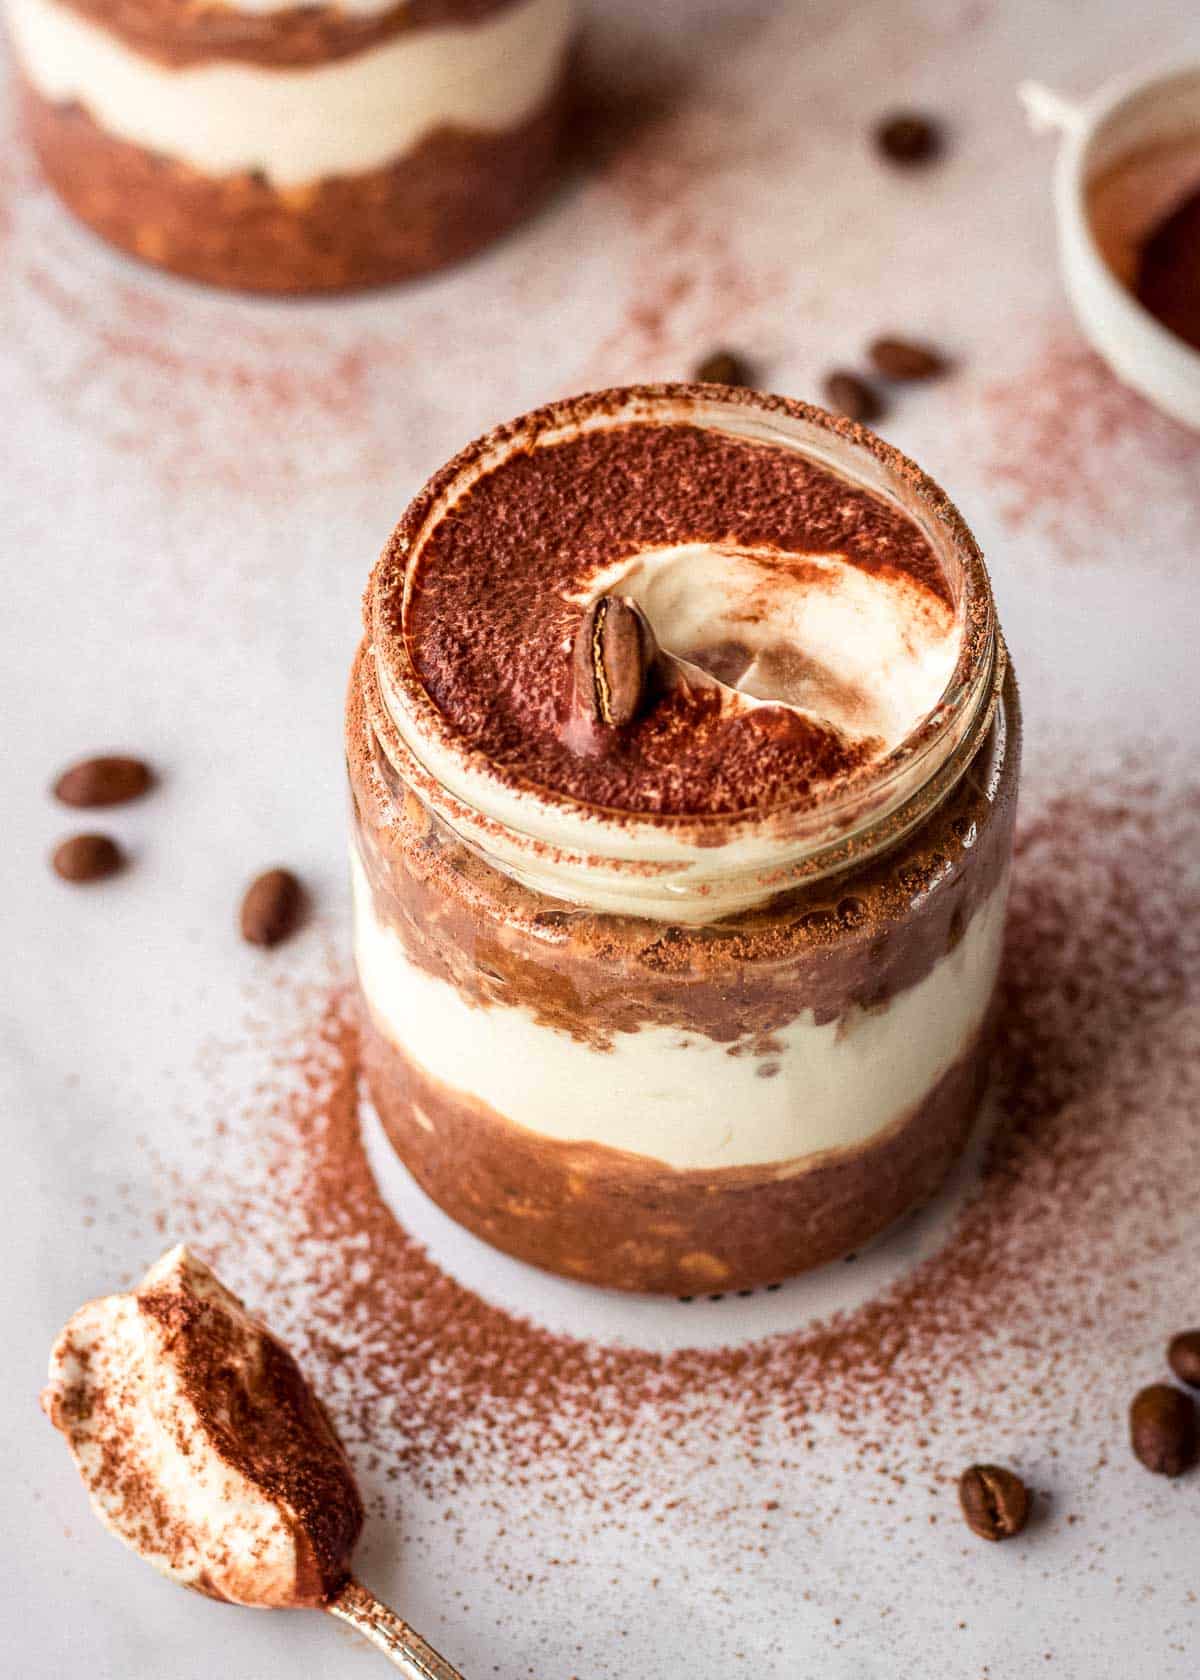 Glass jar of layered tiramisu oats decorated with cocoa powder and coffee beans. A spoonful has been taken out of the jar.